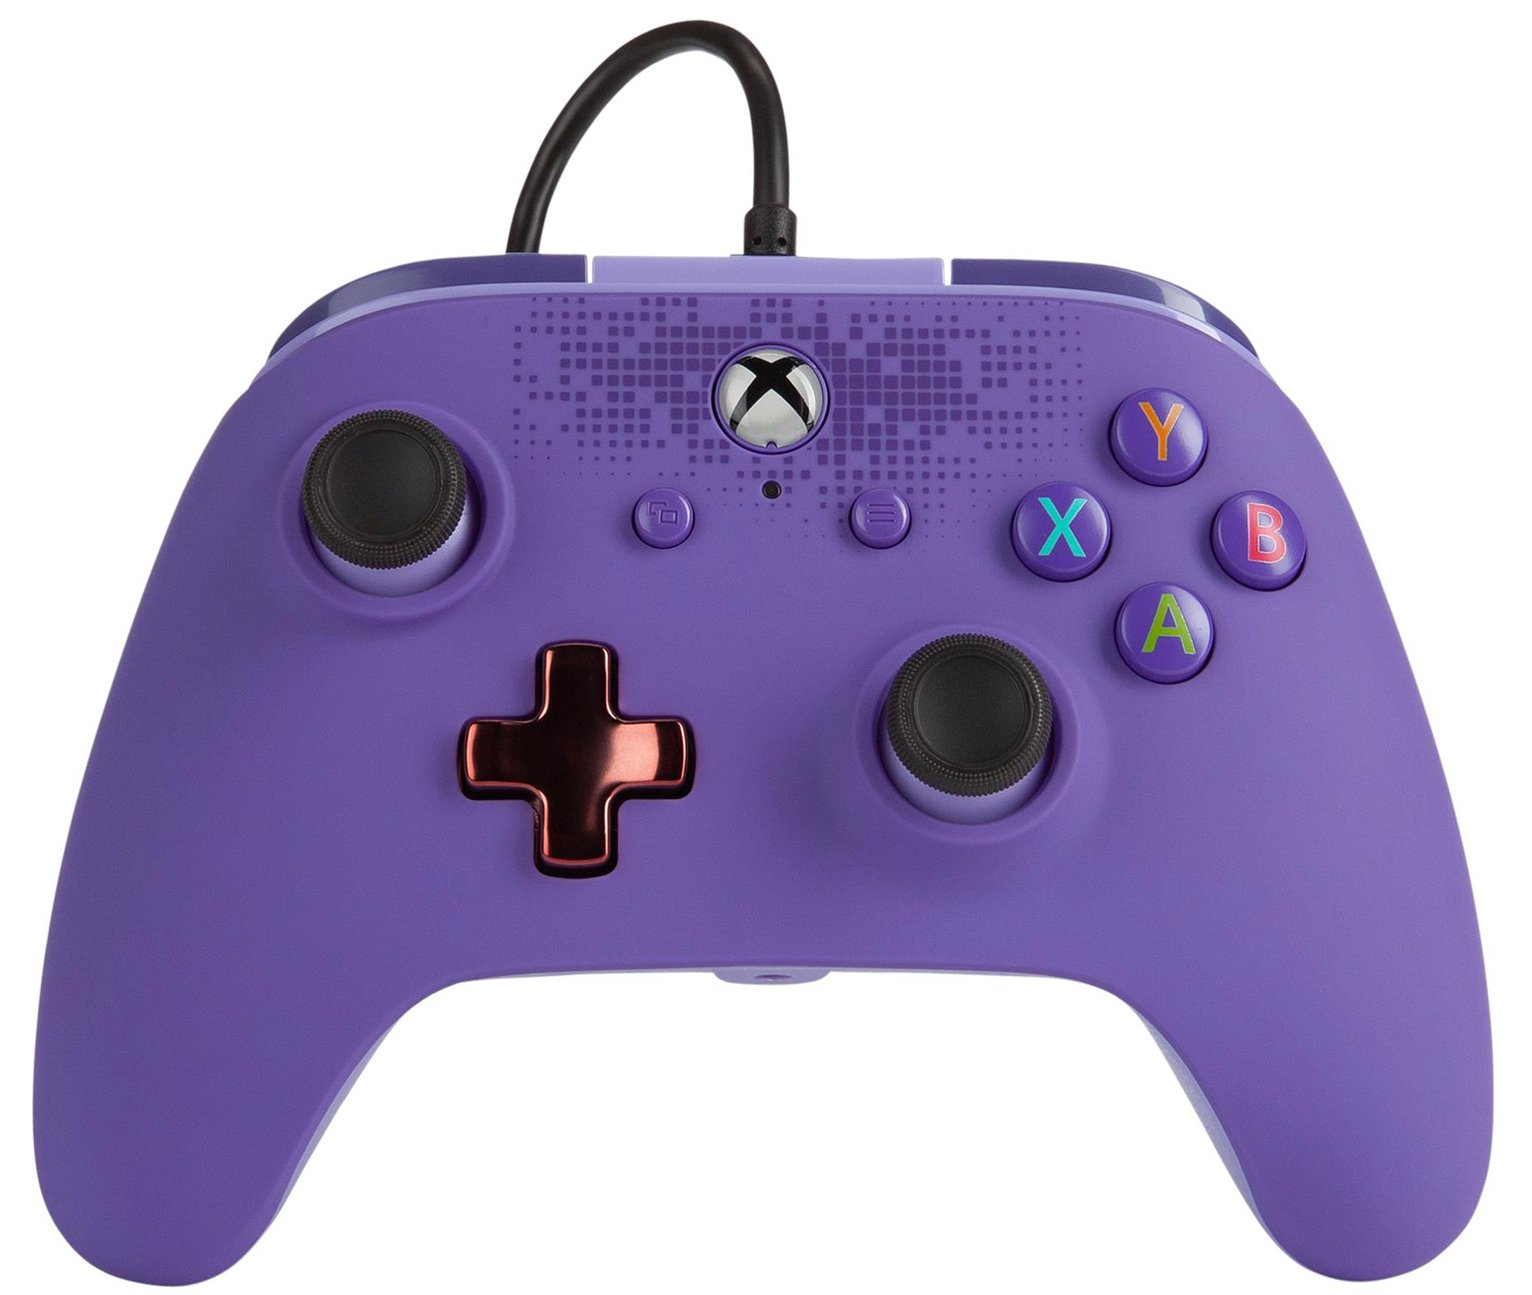 PowerA Enhanced Xbox One Wired Controller Review